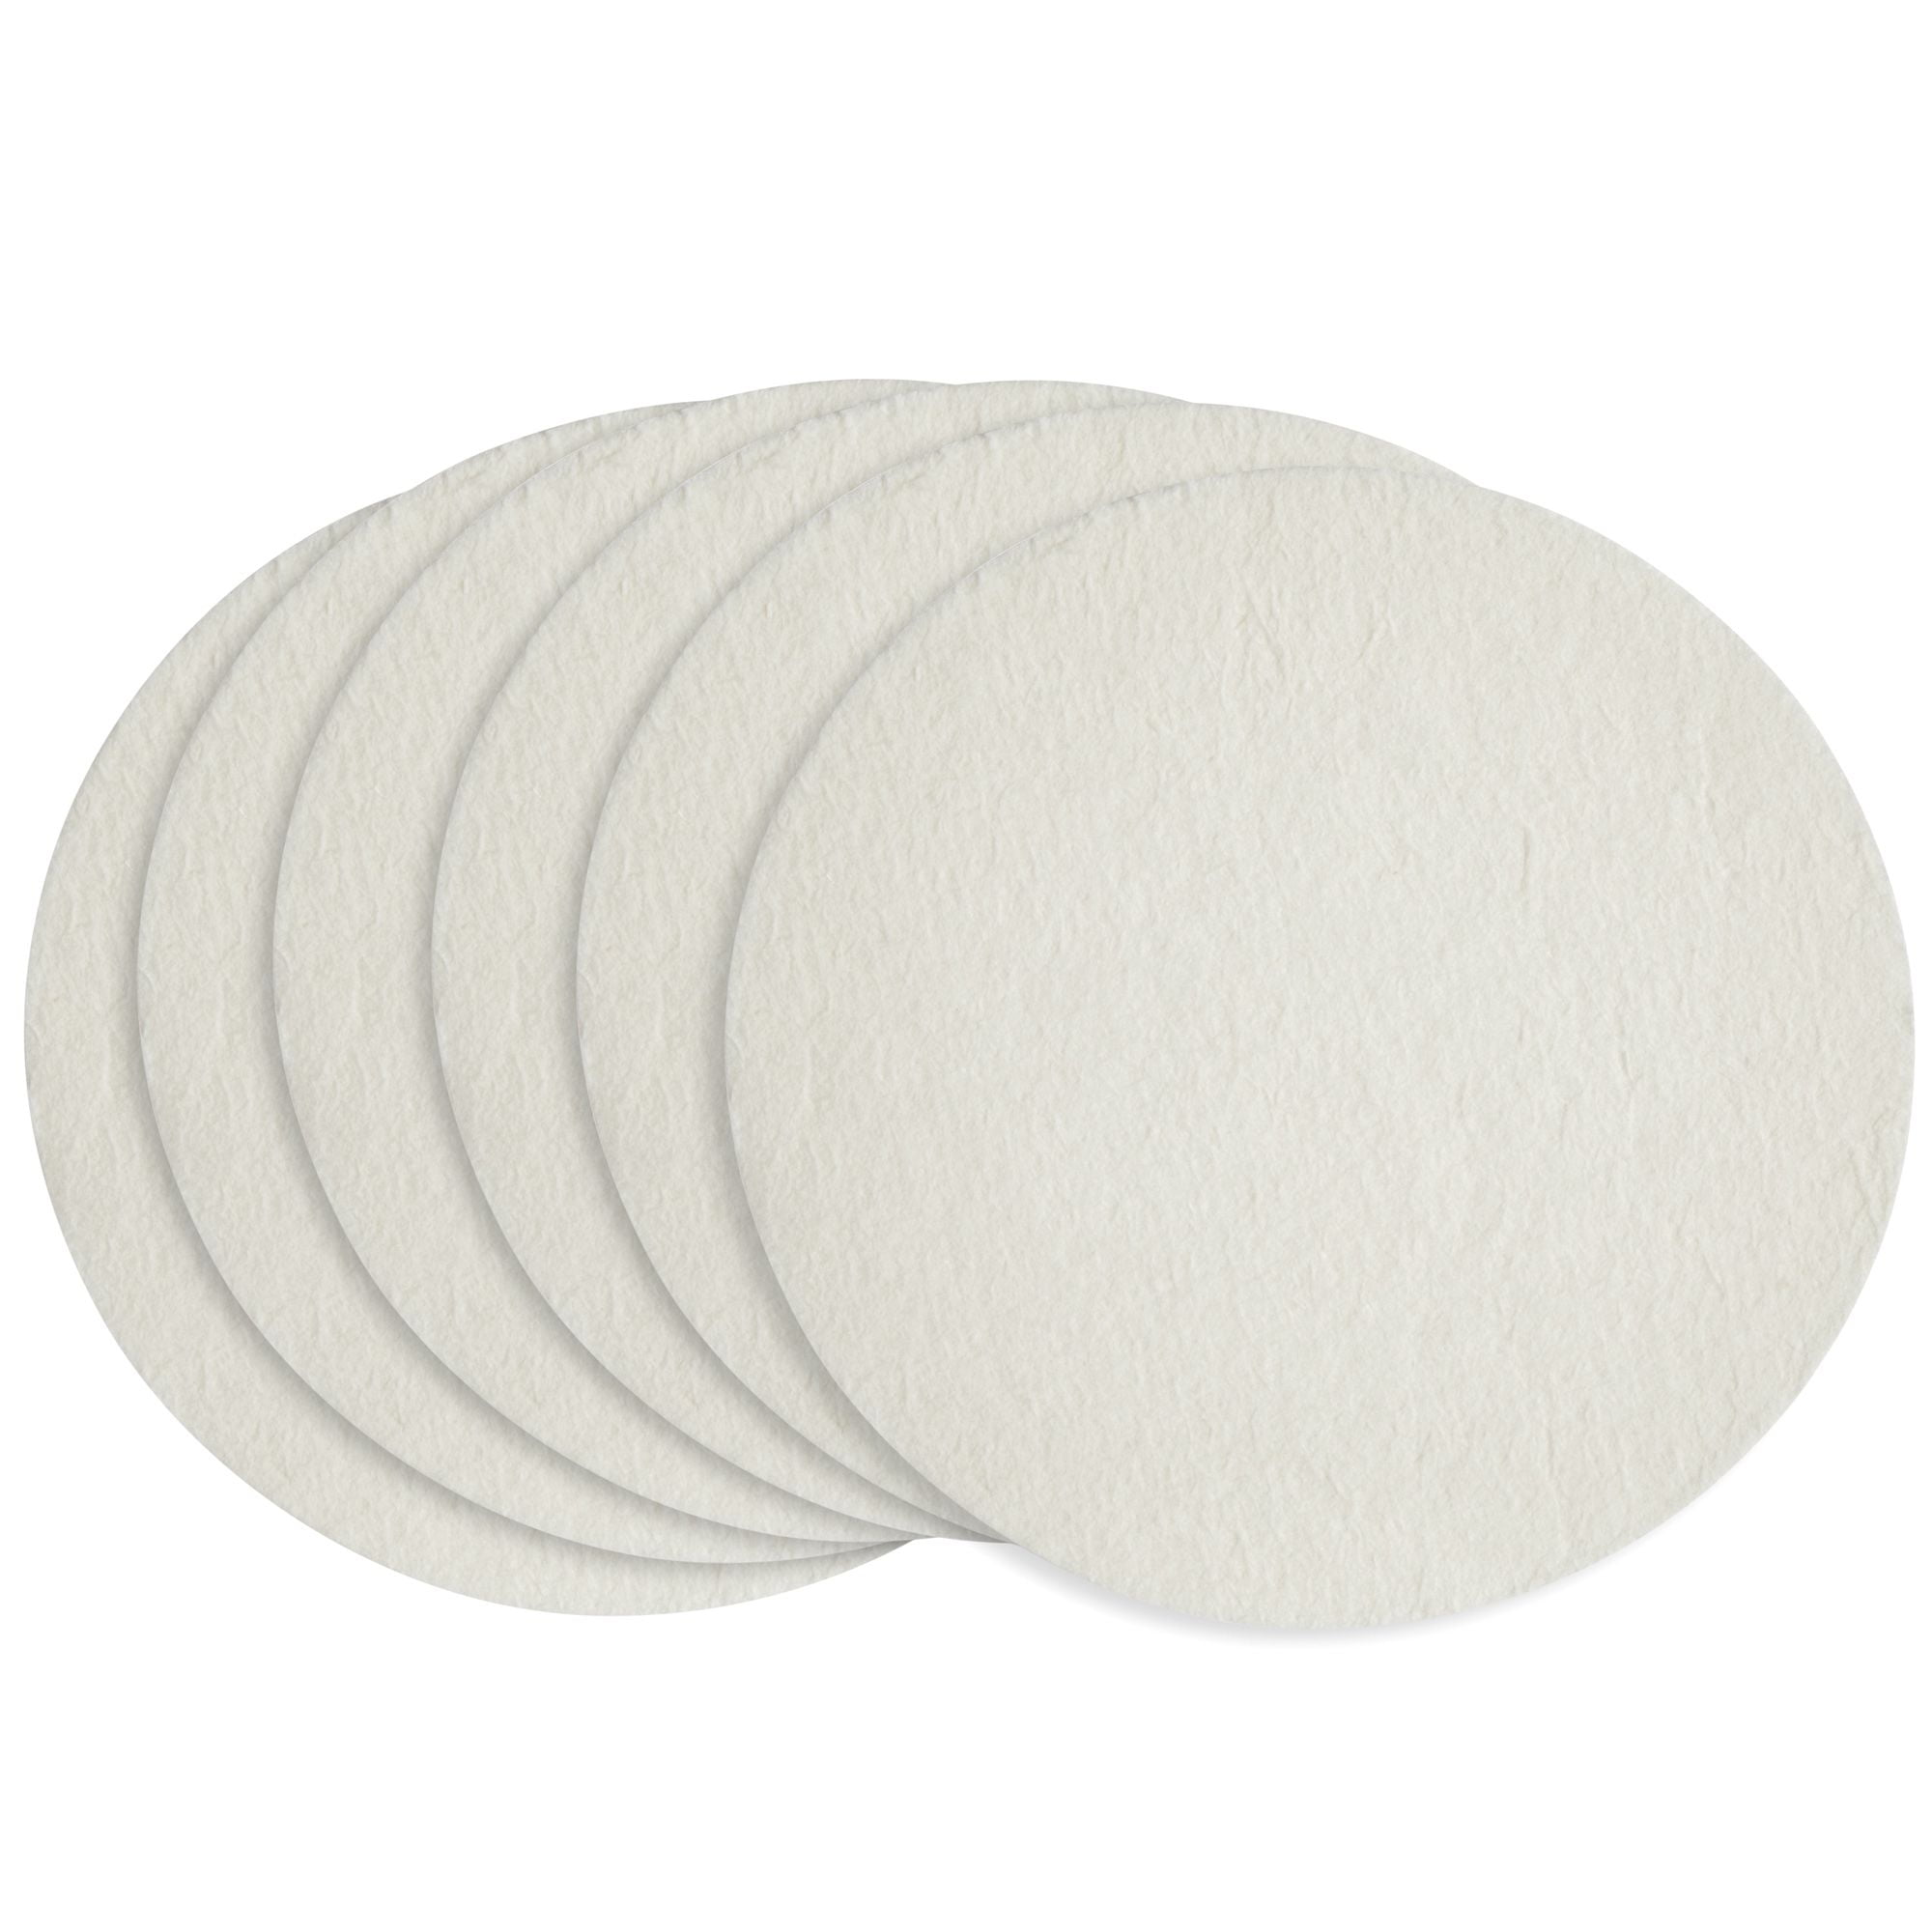  BAR DUDES™ Cardboard Coasters 100 Pack 4 inch Round - White Blank  Coasters Bulk Set - Paper Coasters for Drinks, DIY, Kids Arts and Crafts :  Home & Kitchen